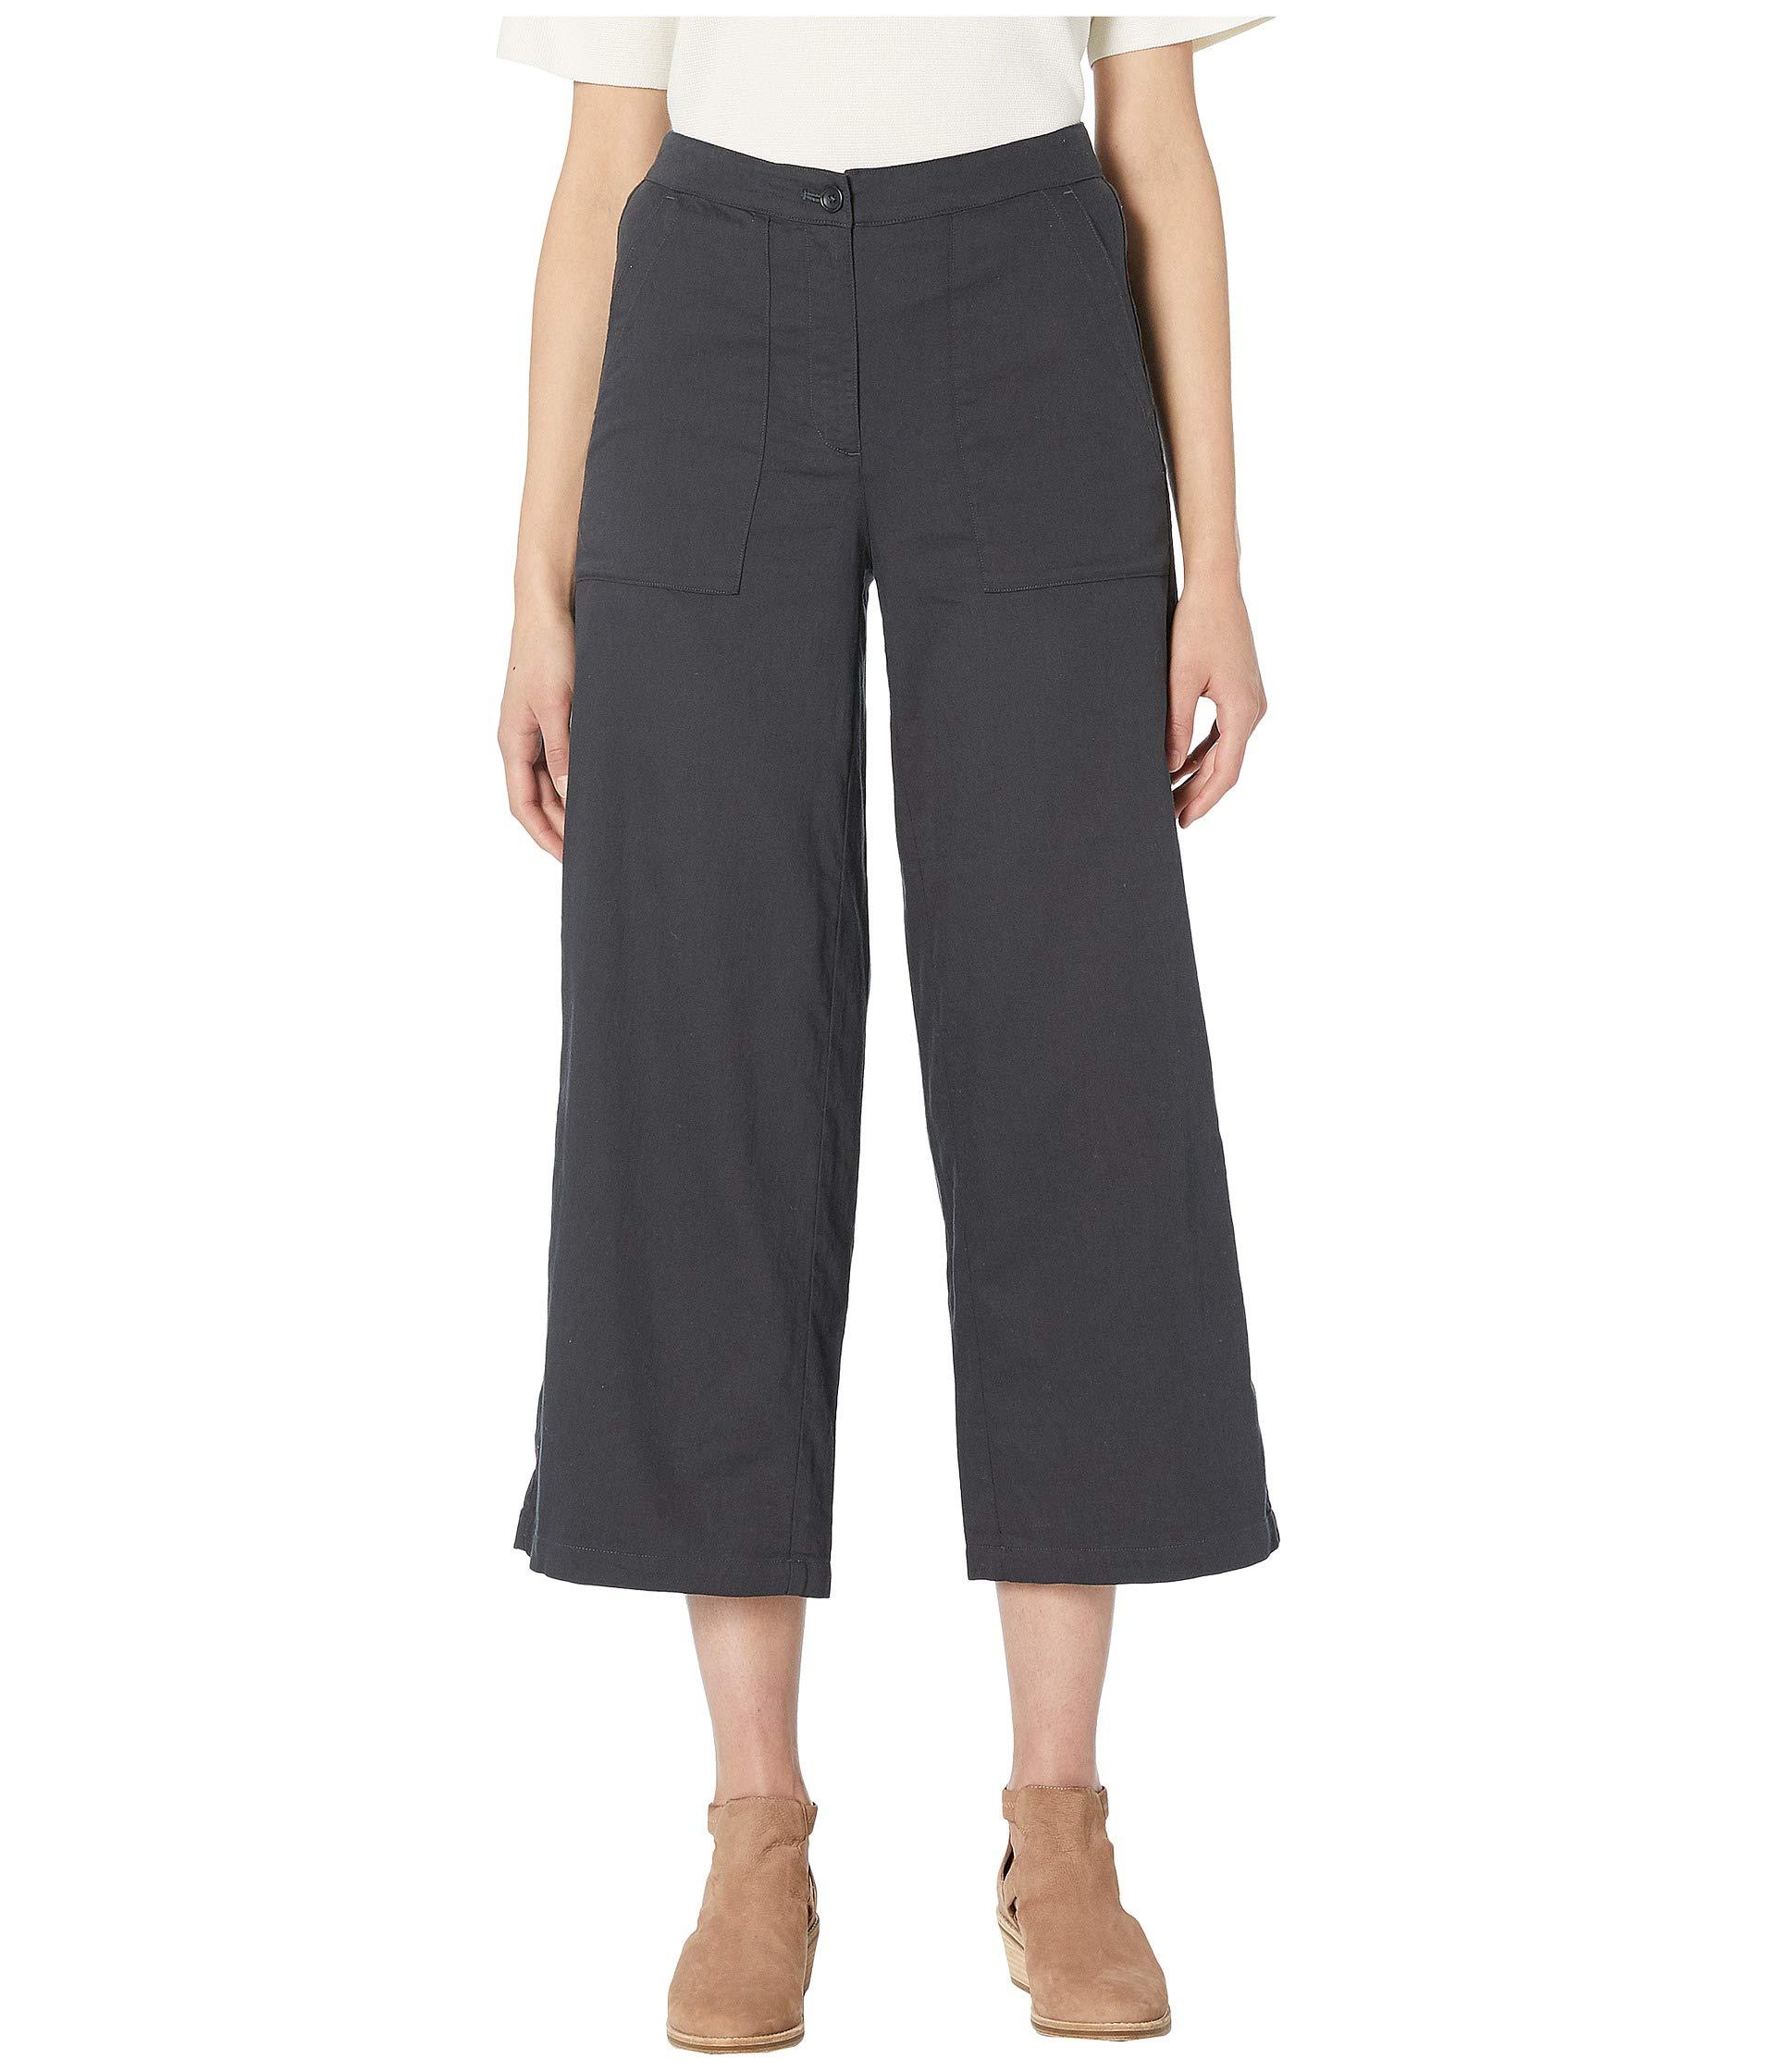 Lyst - Eileen Fisher Soft Organic Cotton Twill High-waisted Wide Ankle ...